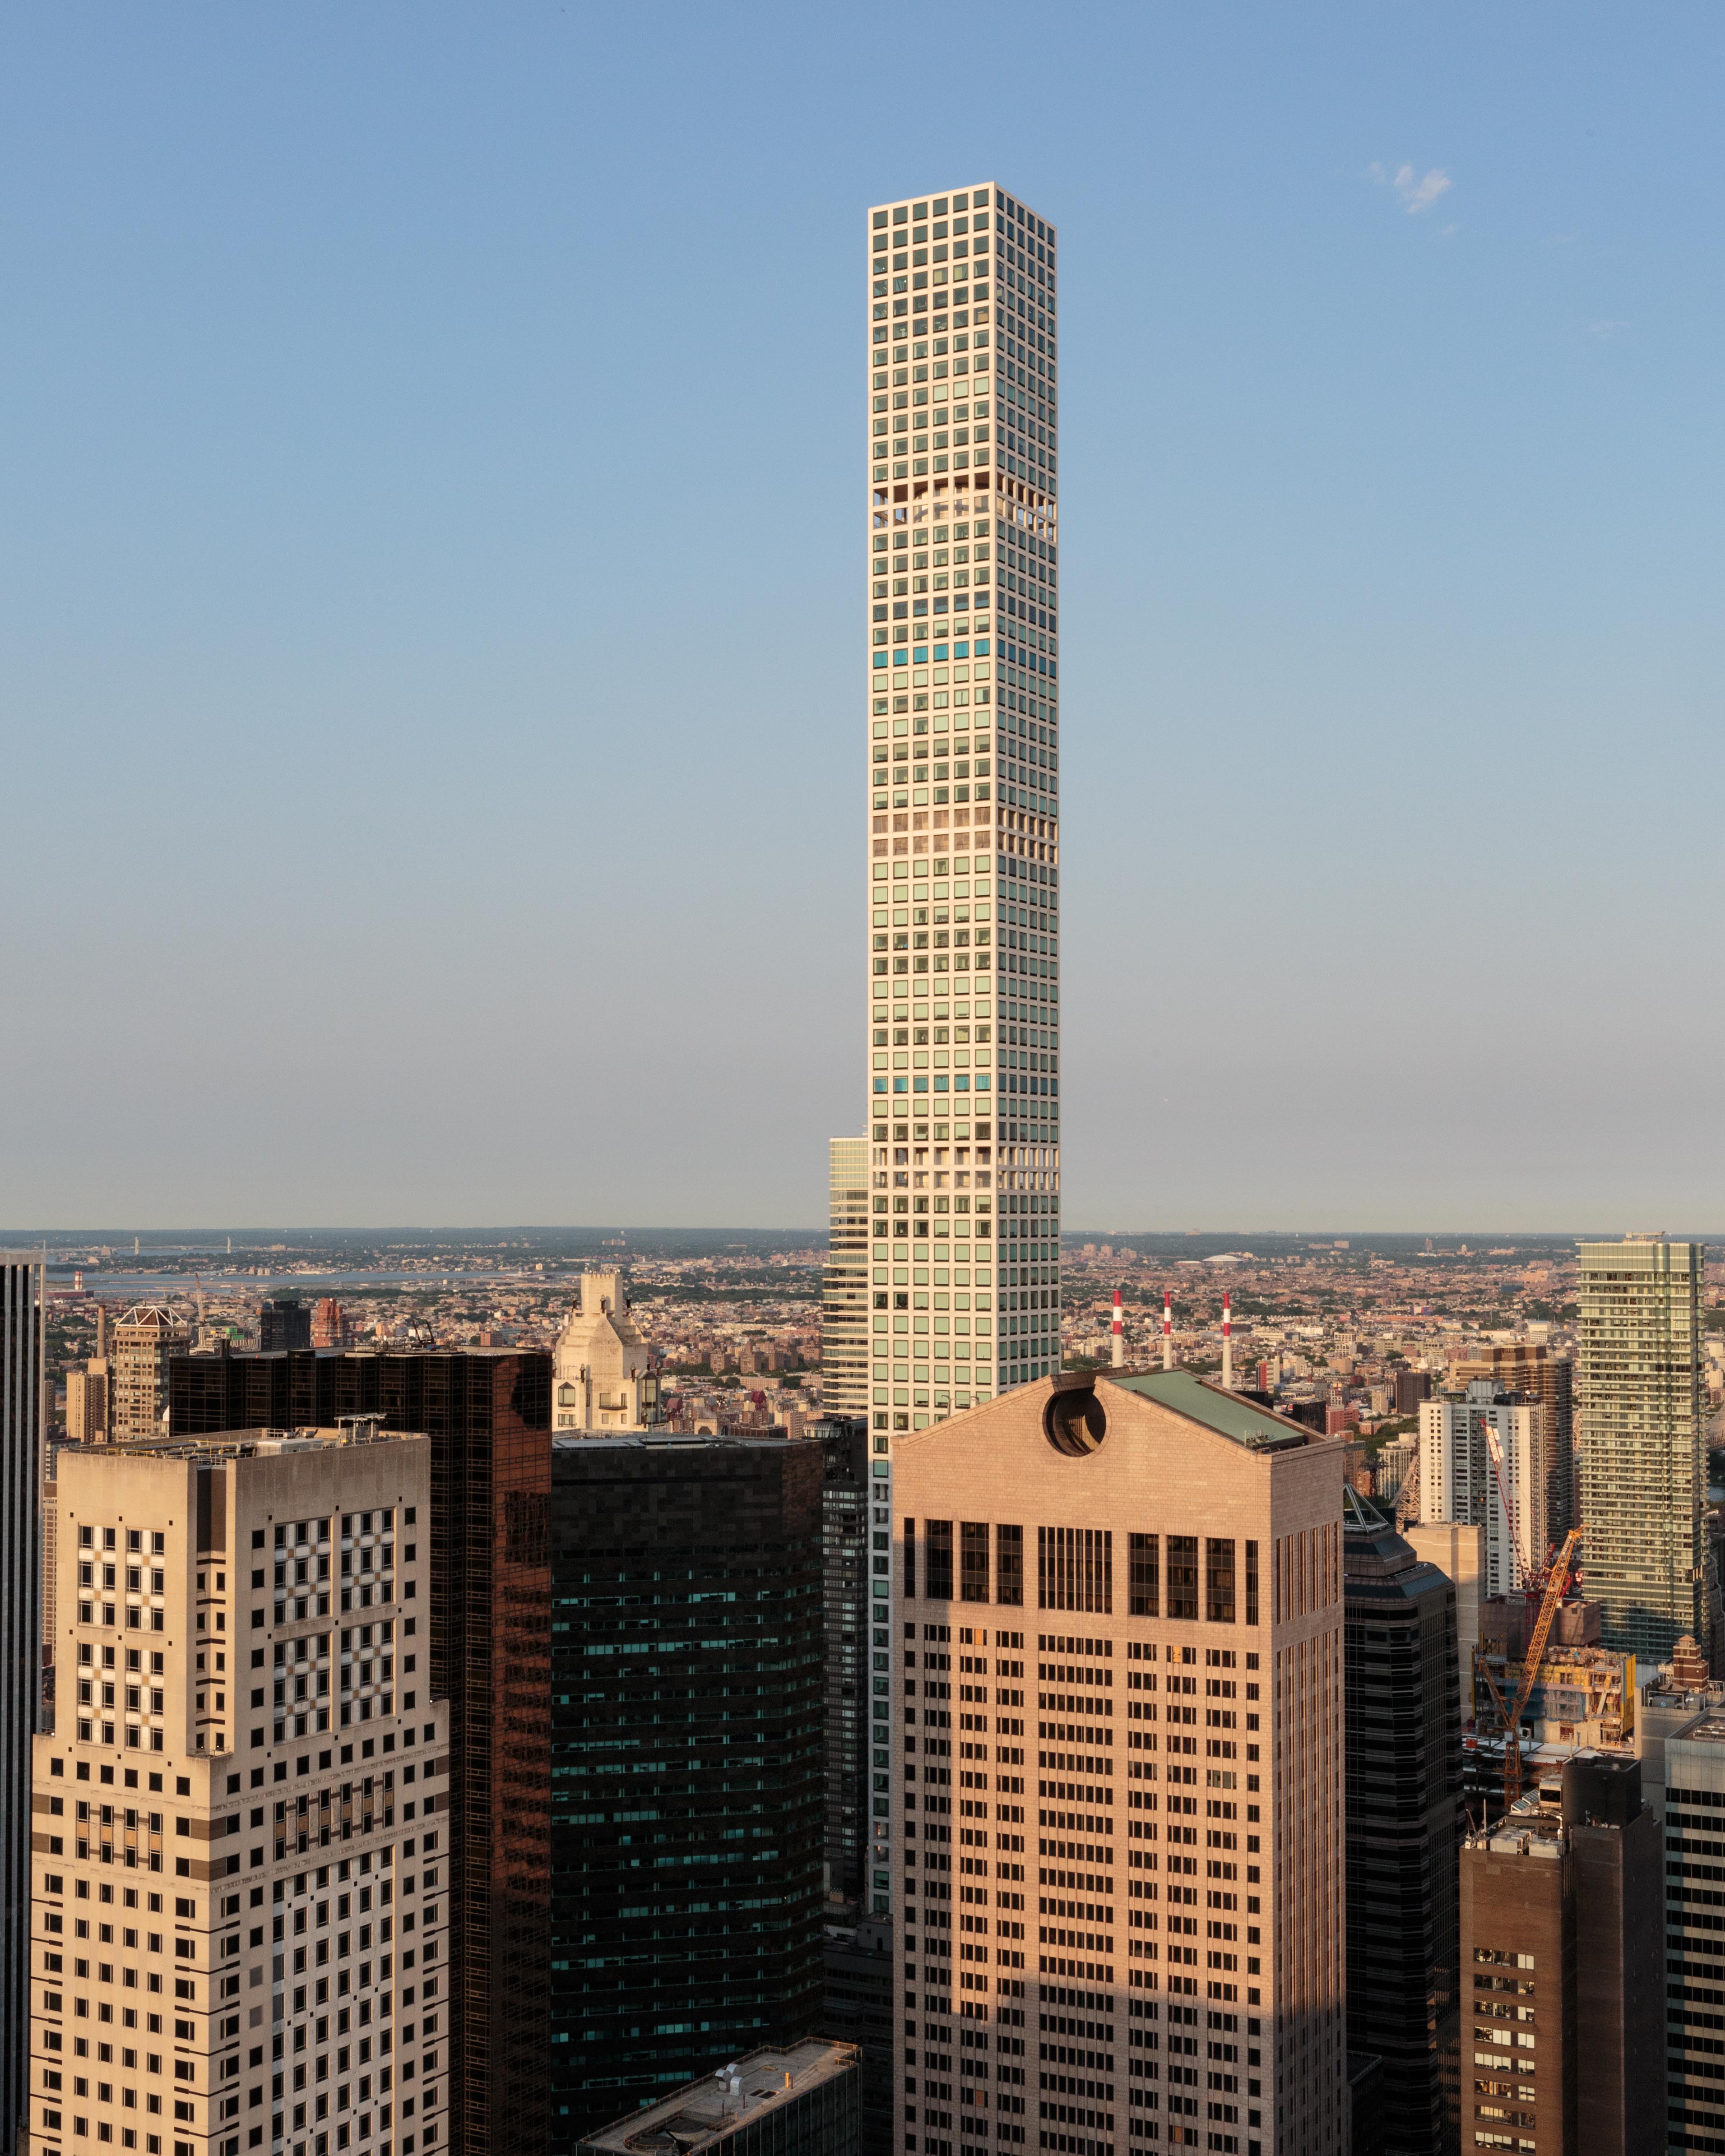 432 Park Avenue from 53 West 53rd Street, image by Andrew Campbell Nelson